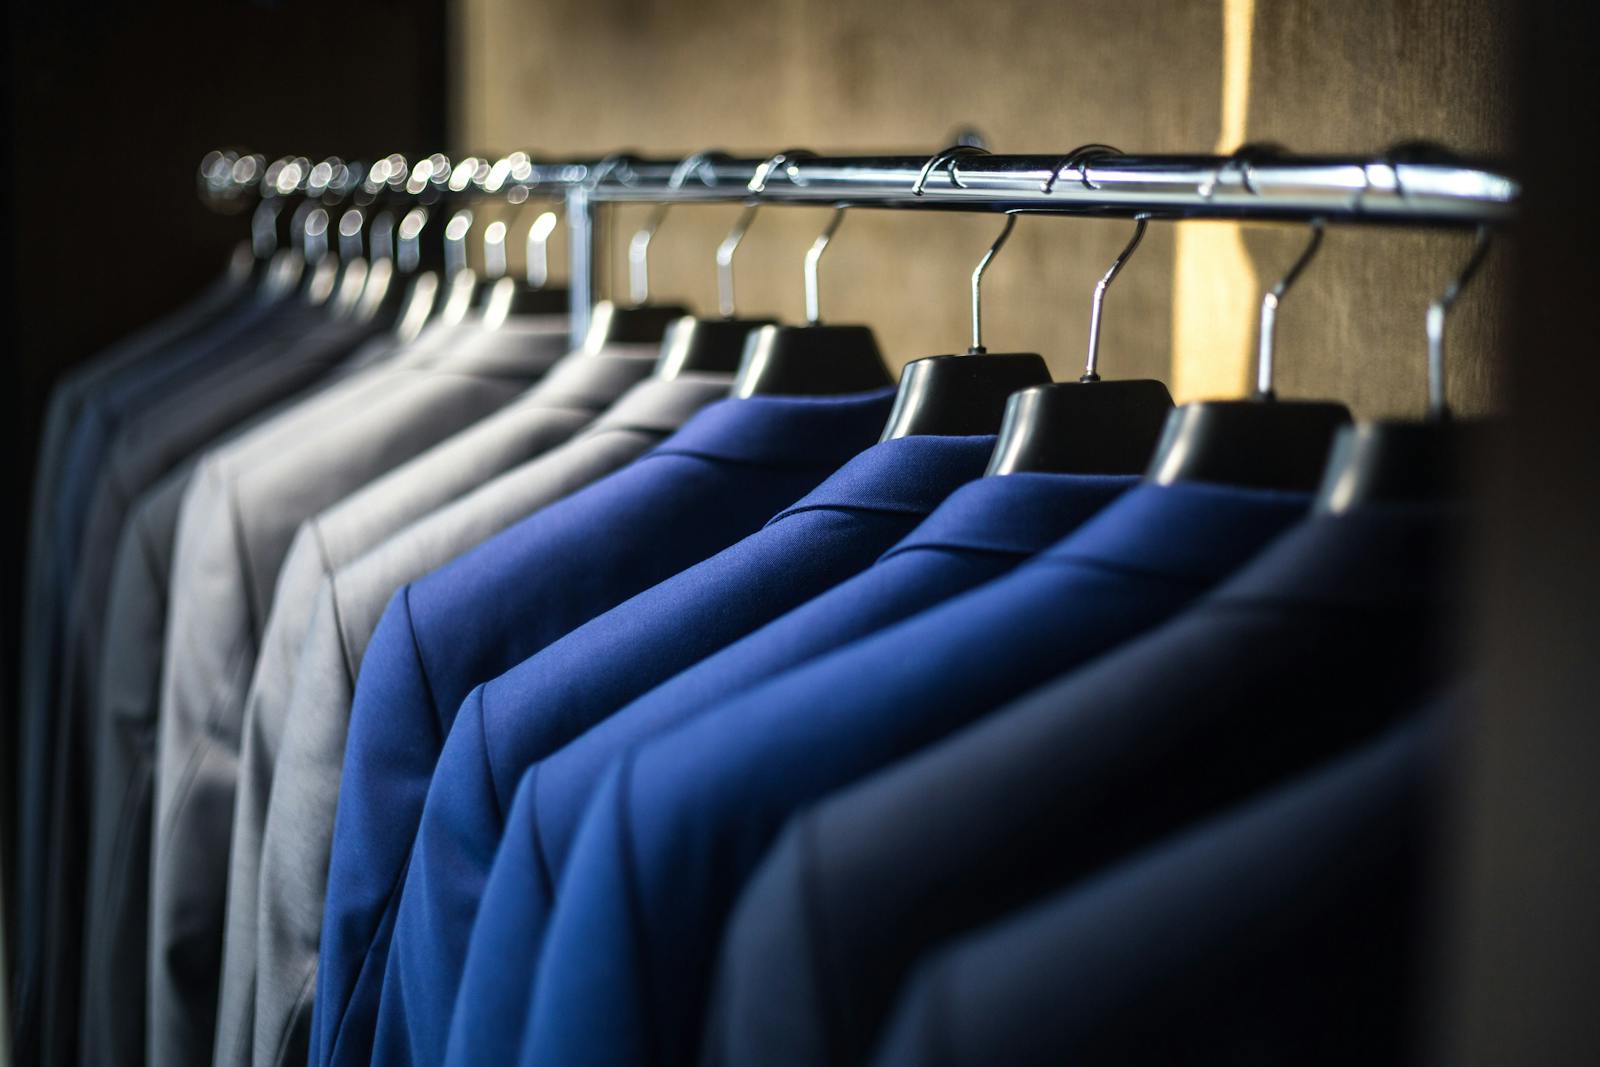 A row of suits neatly organized.